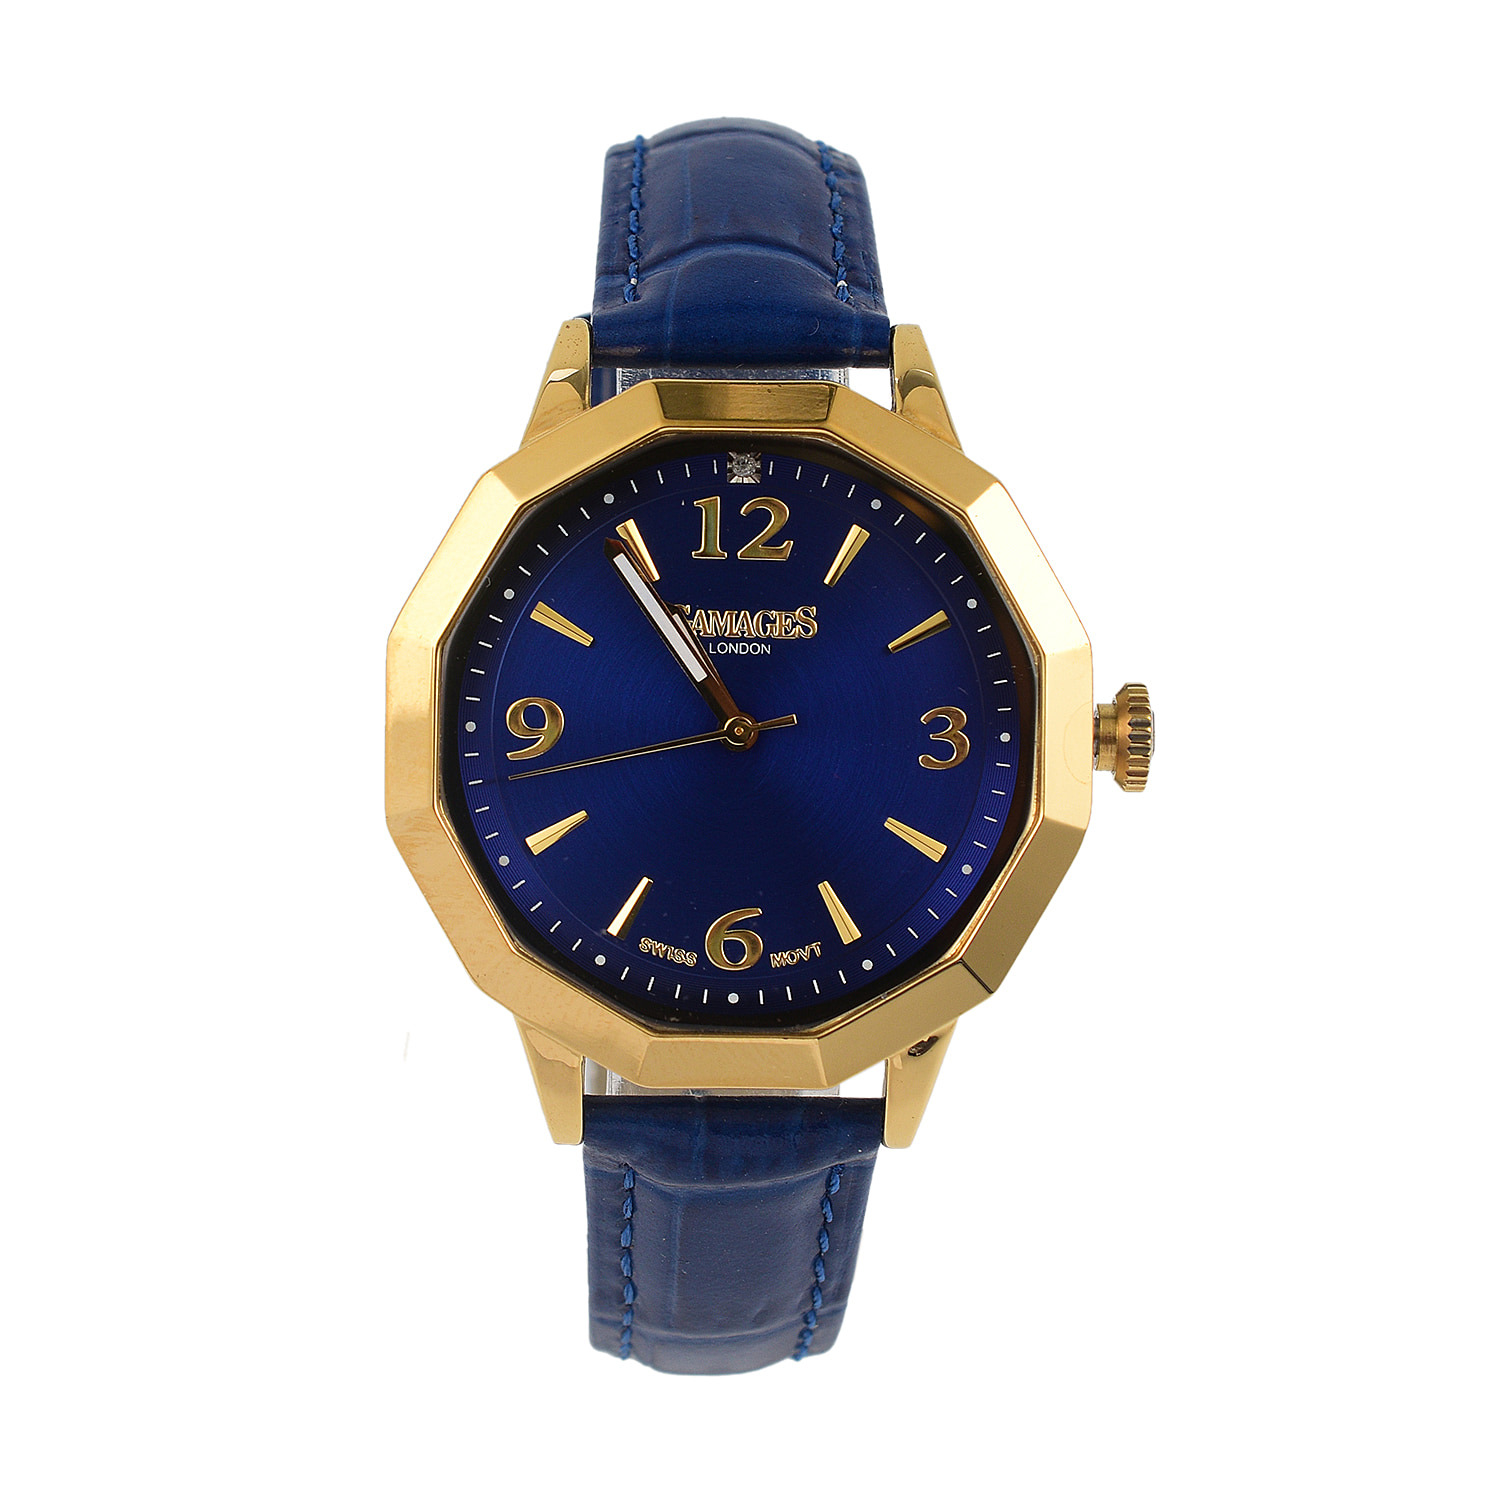 Gamages of London Dame Diamond Swiss Quartz Movement Water Resistant Watch with Navy Blue Leather Strap in Gold Tone